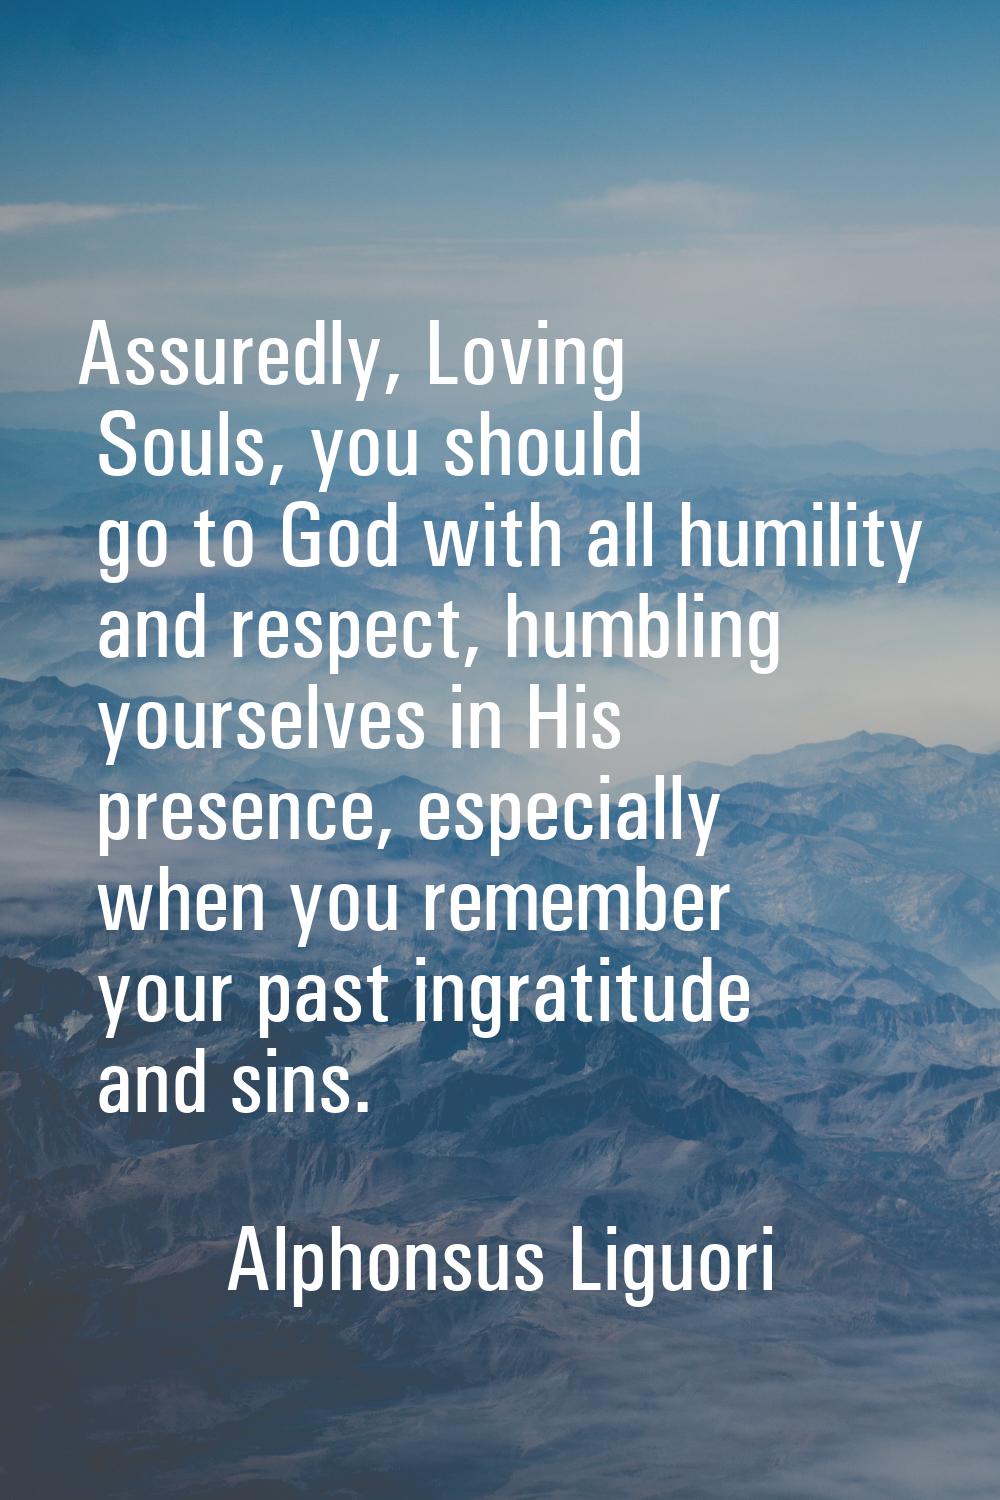 Assuredly, Loving Souls, you should go to God with all humility and respect, humbling yourselves in